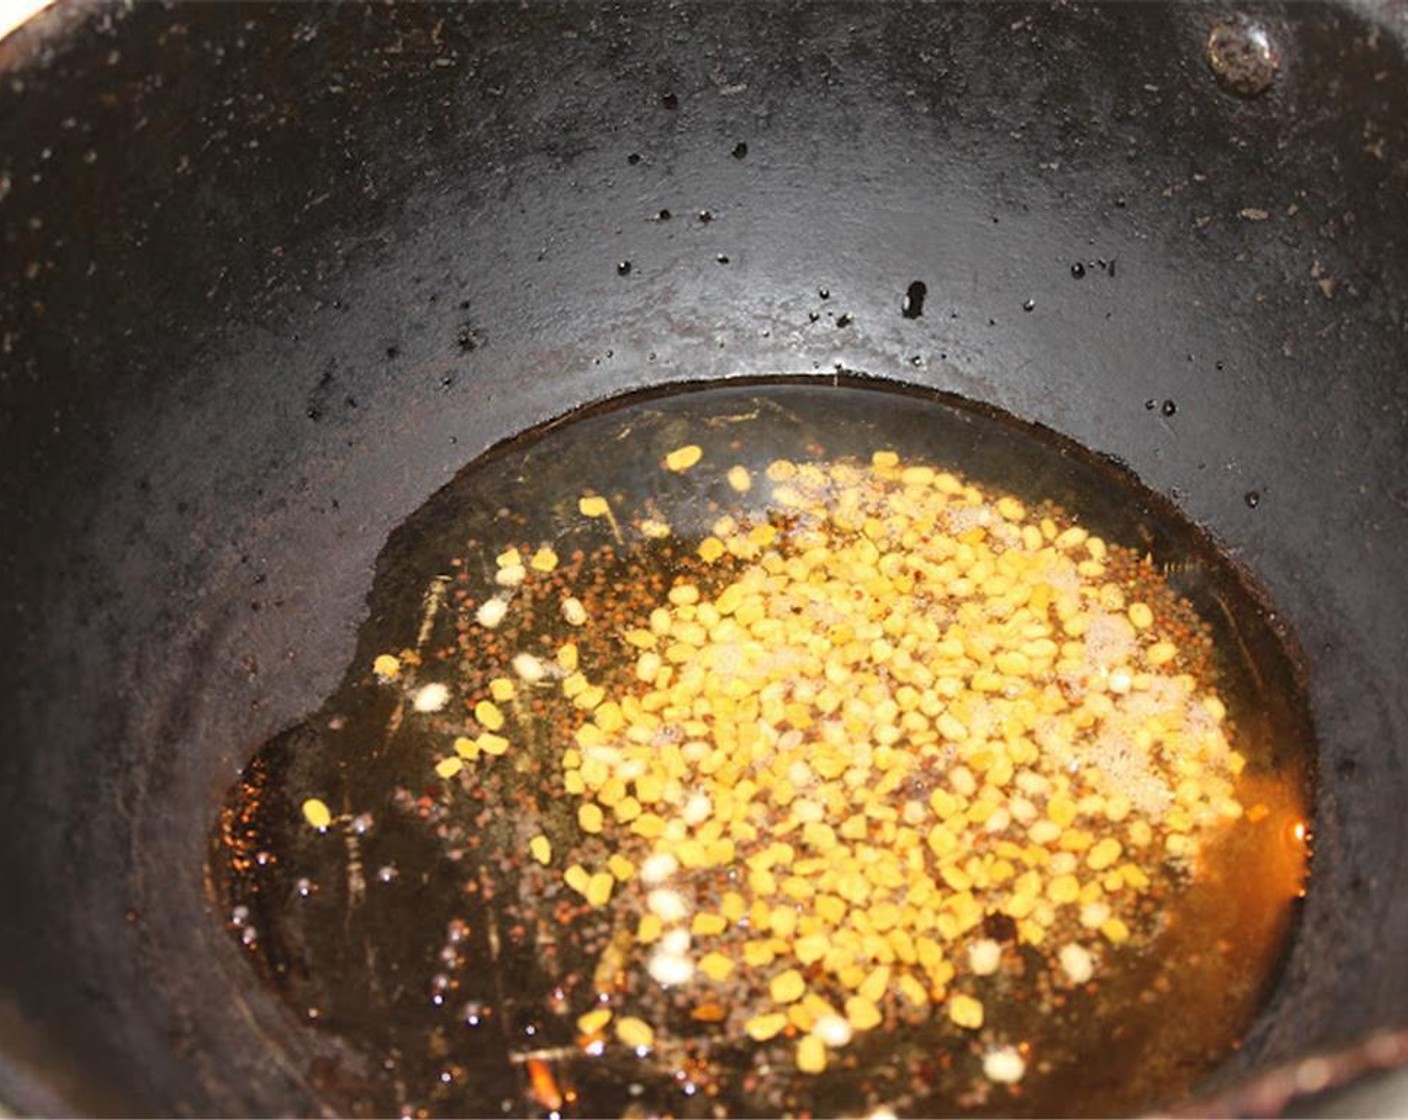 step 3 Add Fenugreek Seeds (1 tsp) and cook until the mixture browns.